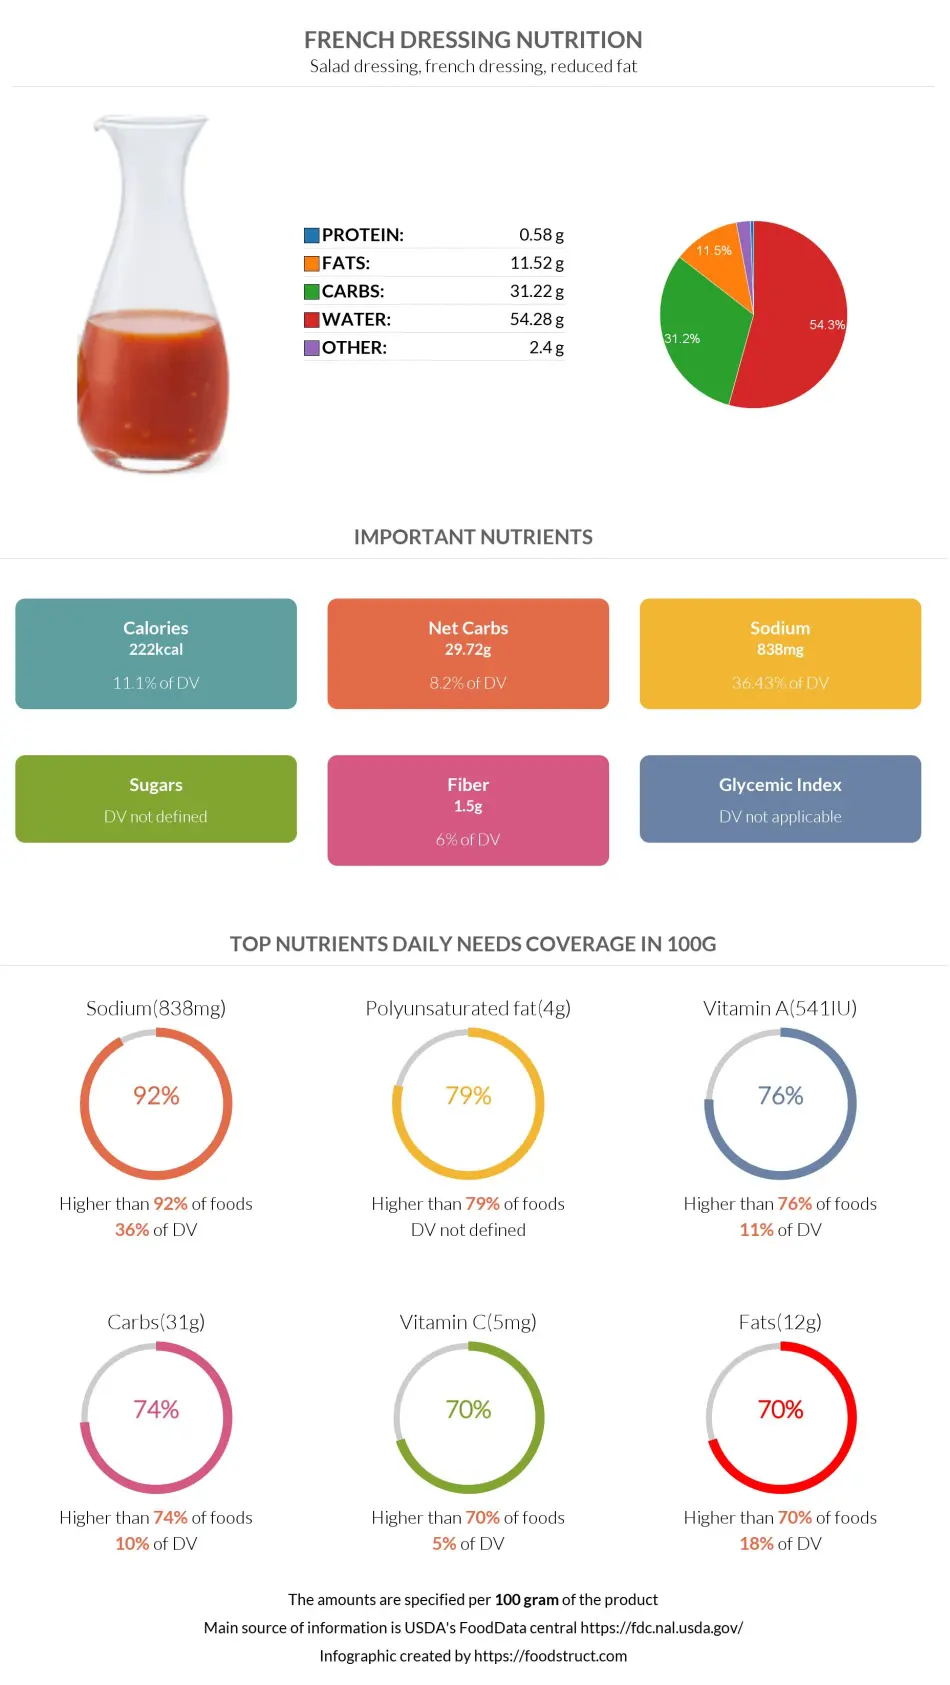 French dressing nutrition infographic